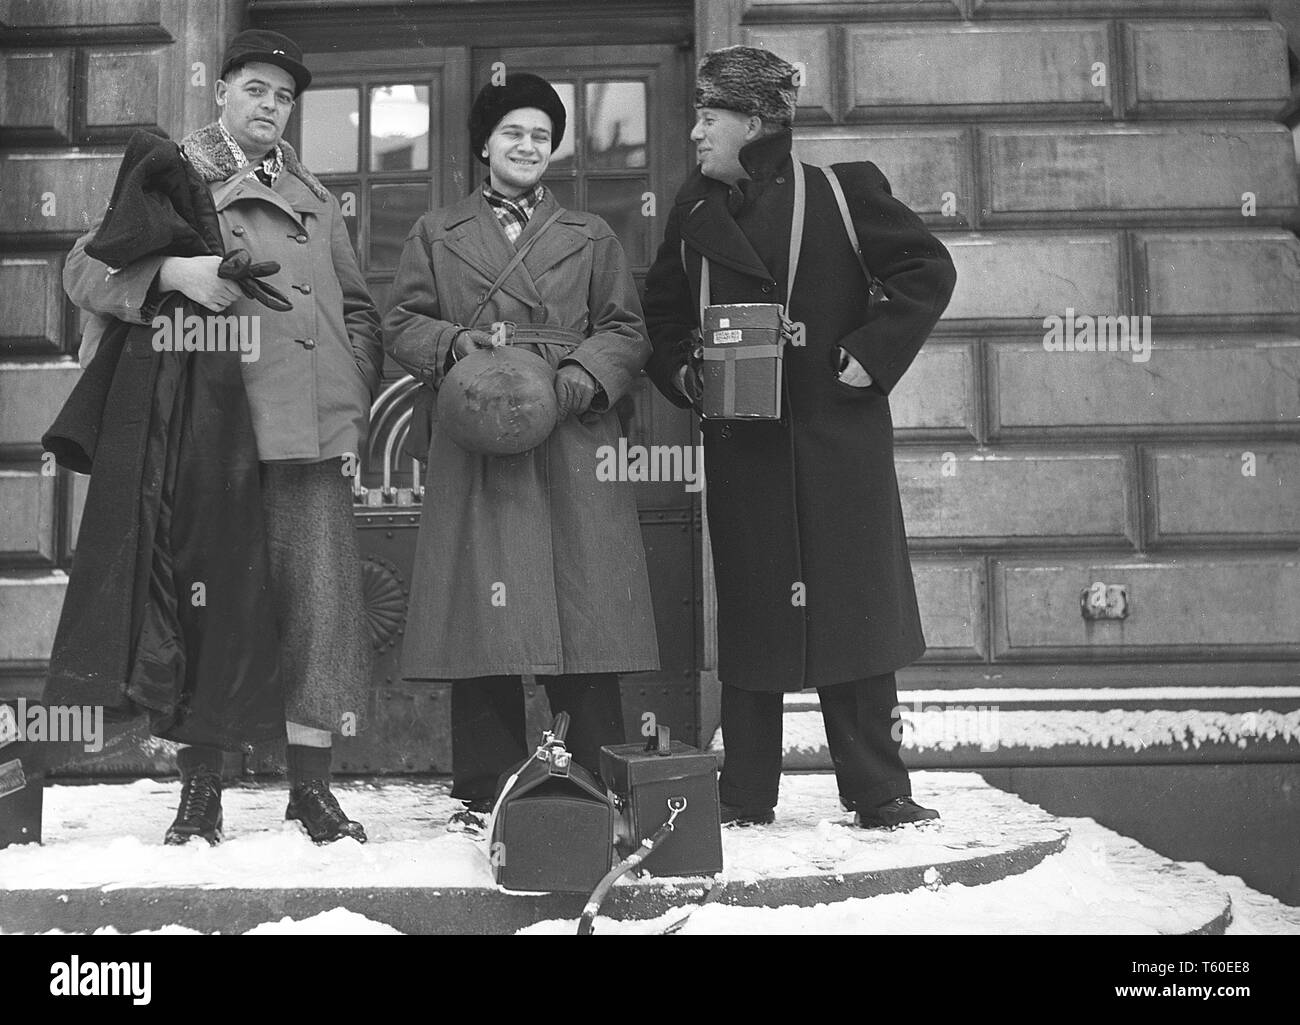 The Winter War. A military conflict between the Soviet union and Finland. It began with a Soviet invasion on november 1939 when Soviet infantery crossed the border on the Karelian Isthmus. Pictured photographer KG Kristoffersson back in Stockholm having returned from Finland.  With newspaper journalists Gunnar Müller from Aftonbladet and Karl-Olof Hedström from Stockholmstidningen.  January 1940. Photo Kristoffersson ref 100-7-1 Stock Photo